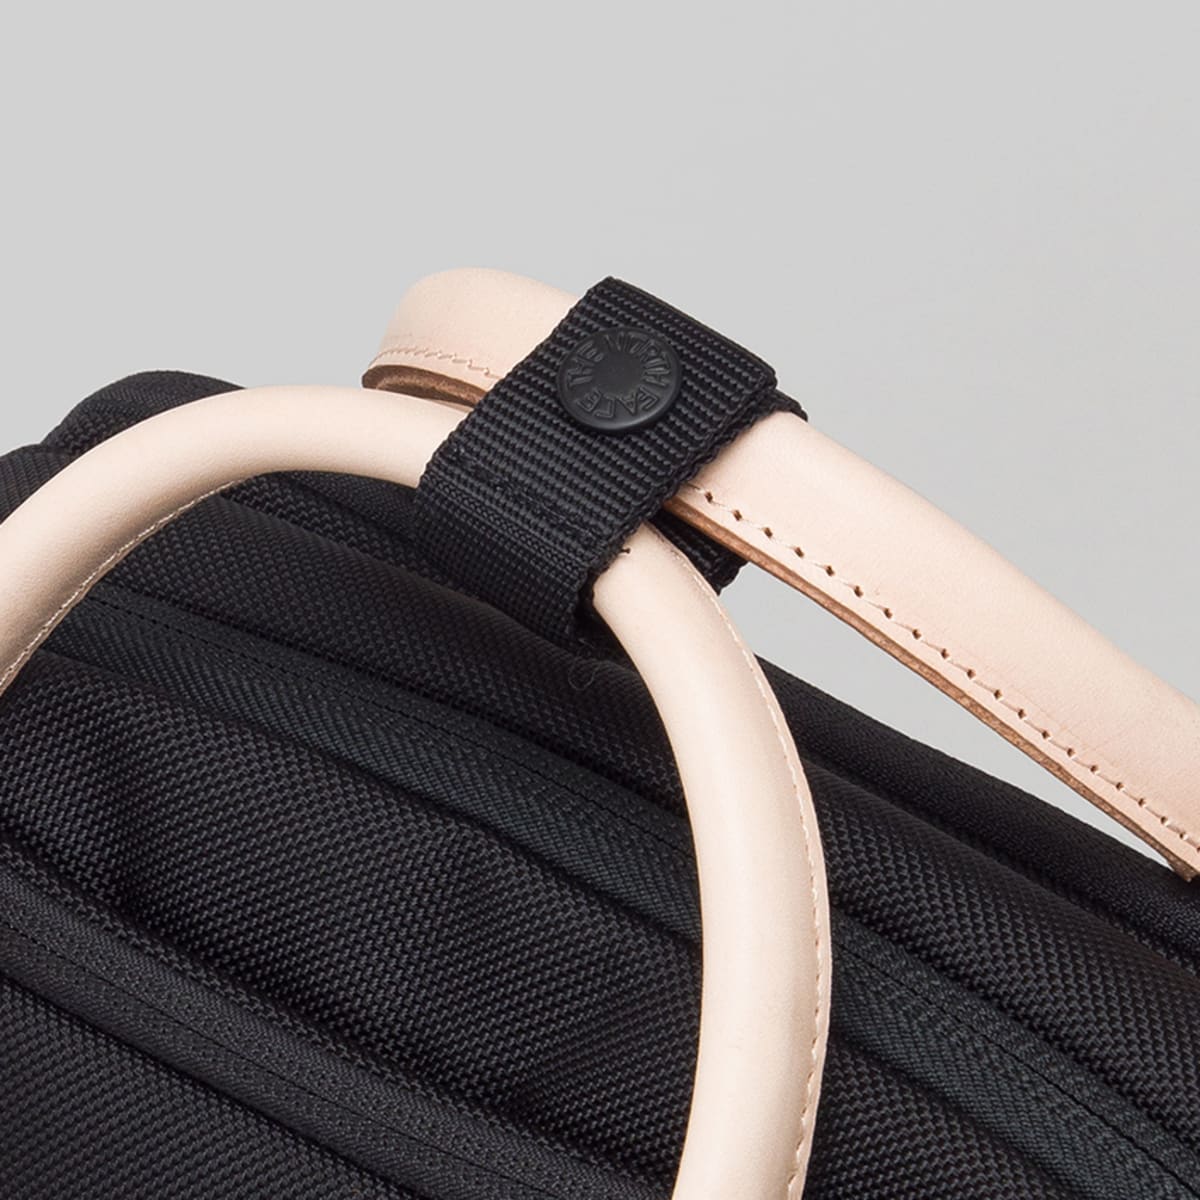 Hender Scheme upgrade the North Face's Shuttle Daypack with its